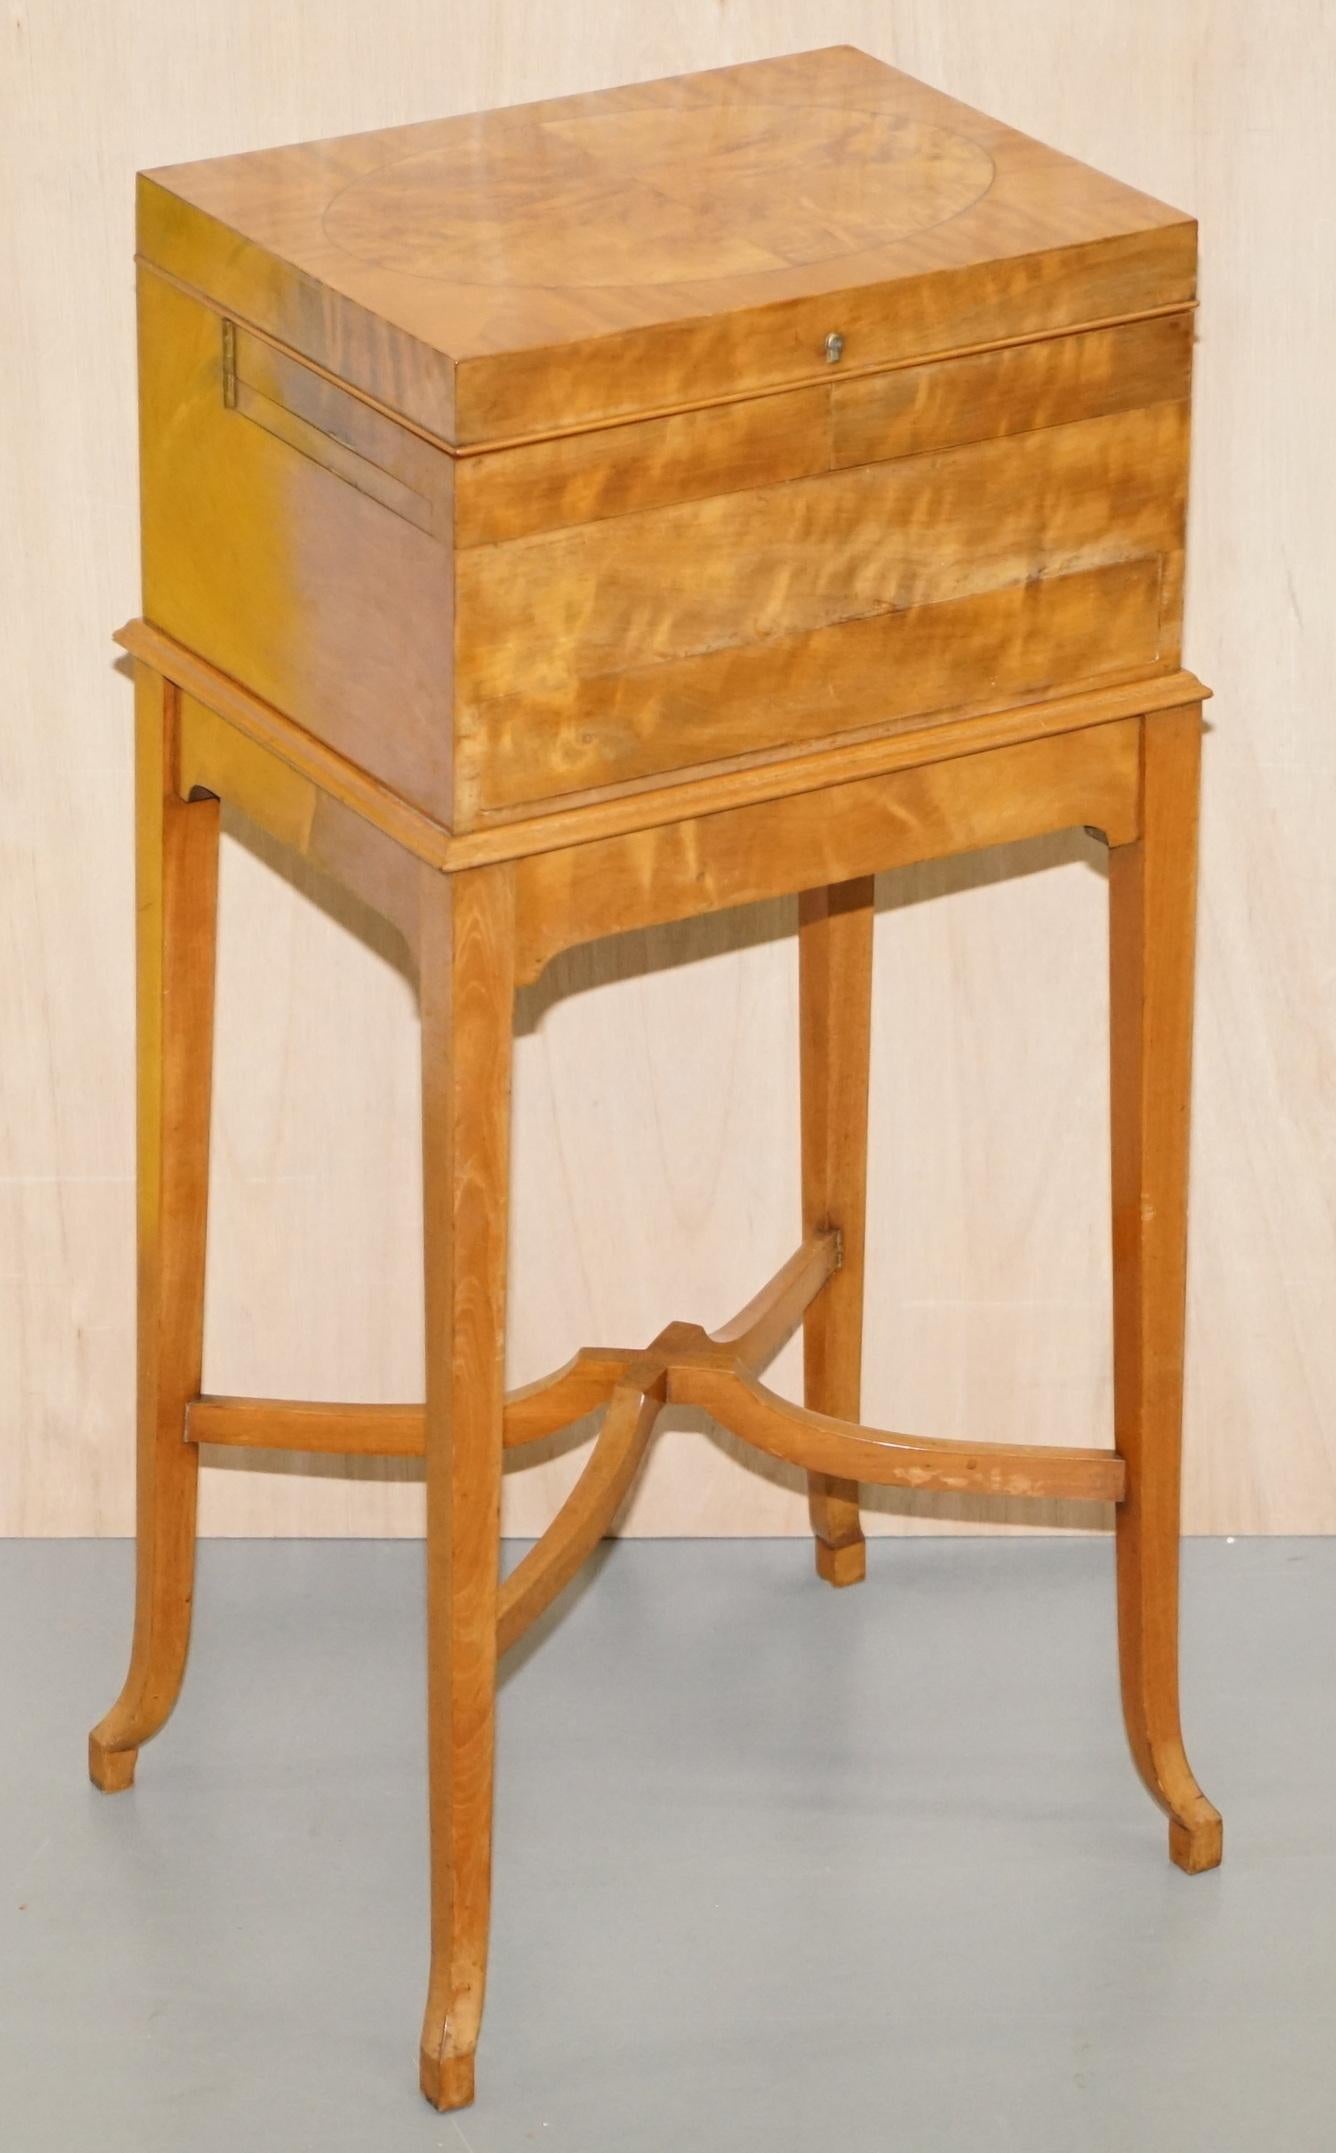 We are delighted to offer for sale this exceptionally fine Art Deco Satin wood George Betjemann & Son’s metamorphic dressing table with full a suite of sterling silver vanity items hallmarked for London 1920

This table is very rare and very